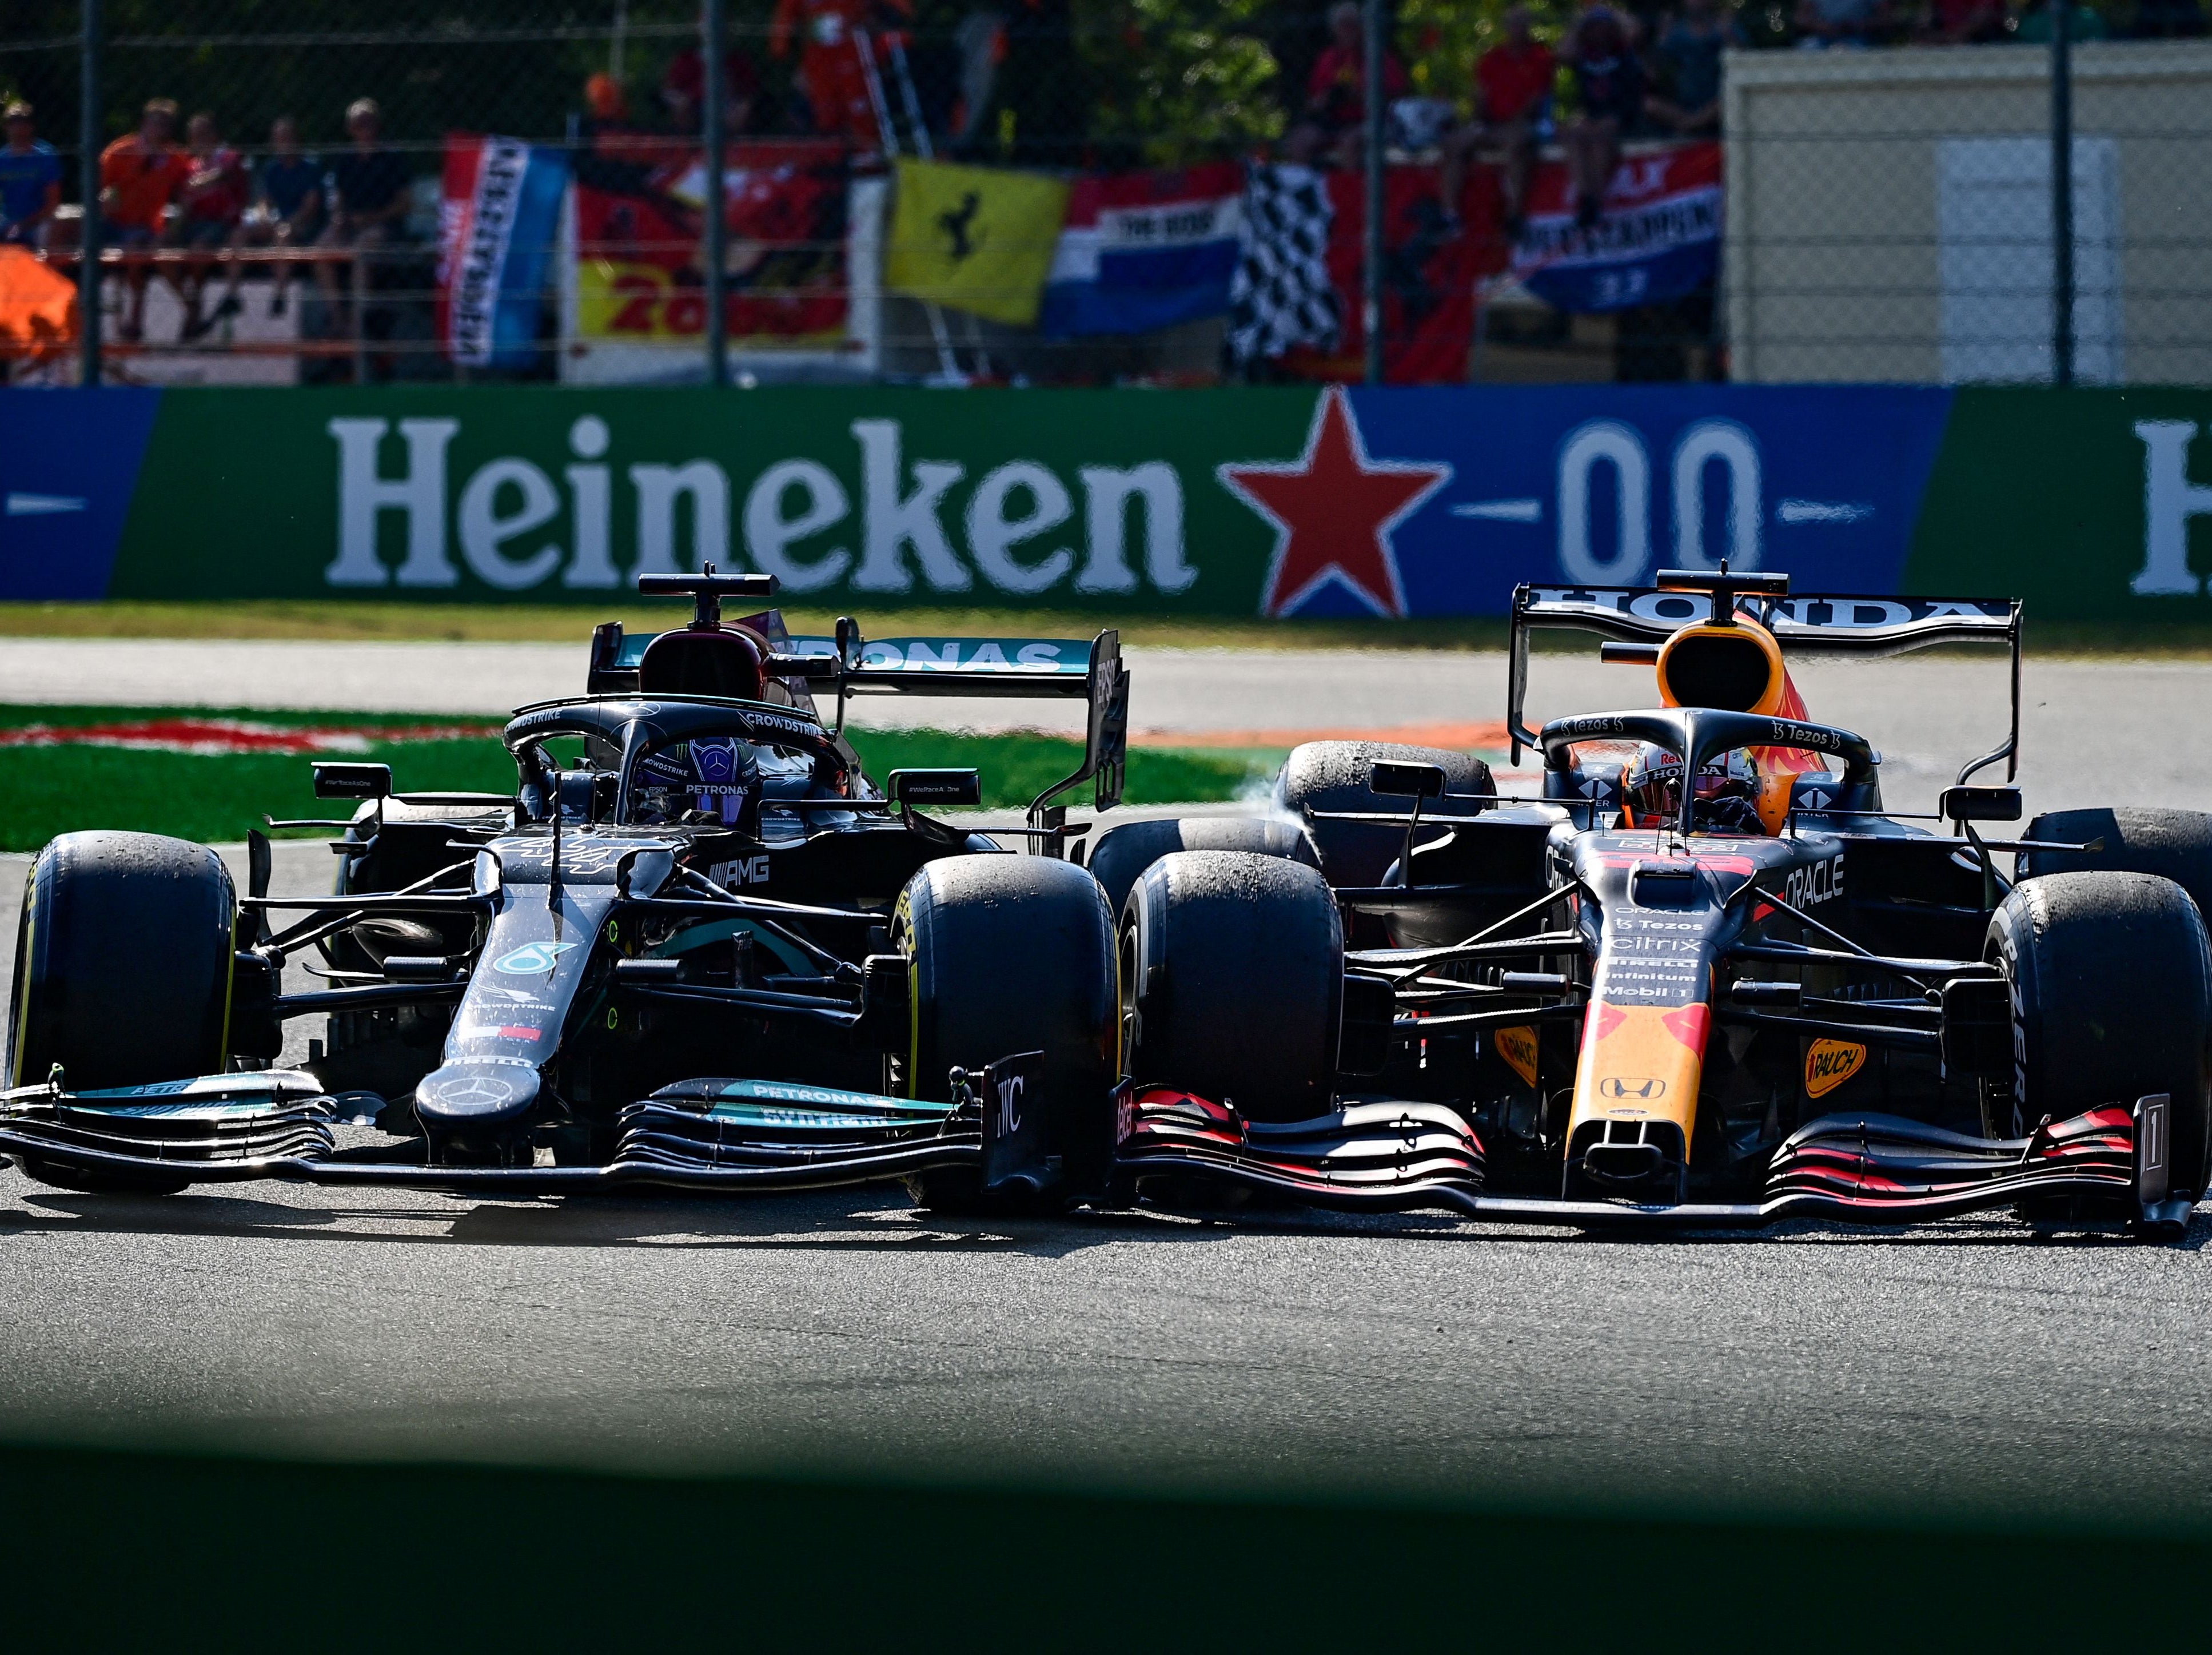 Lewis Hamilton and Max Verstappen’s exploits on the track could go behind a paywall